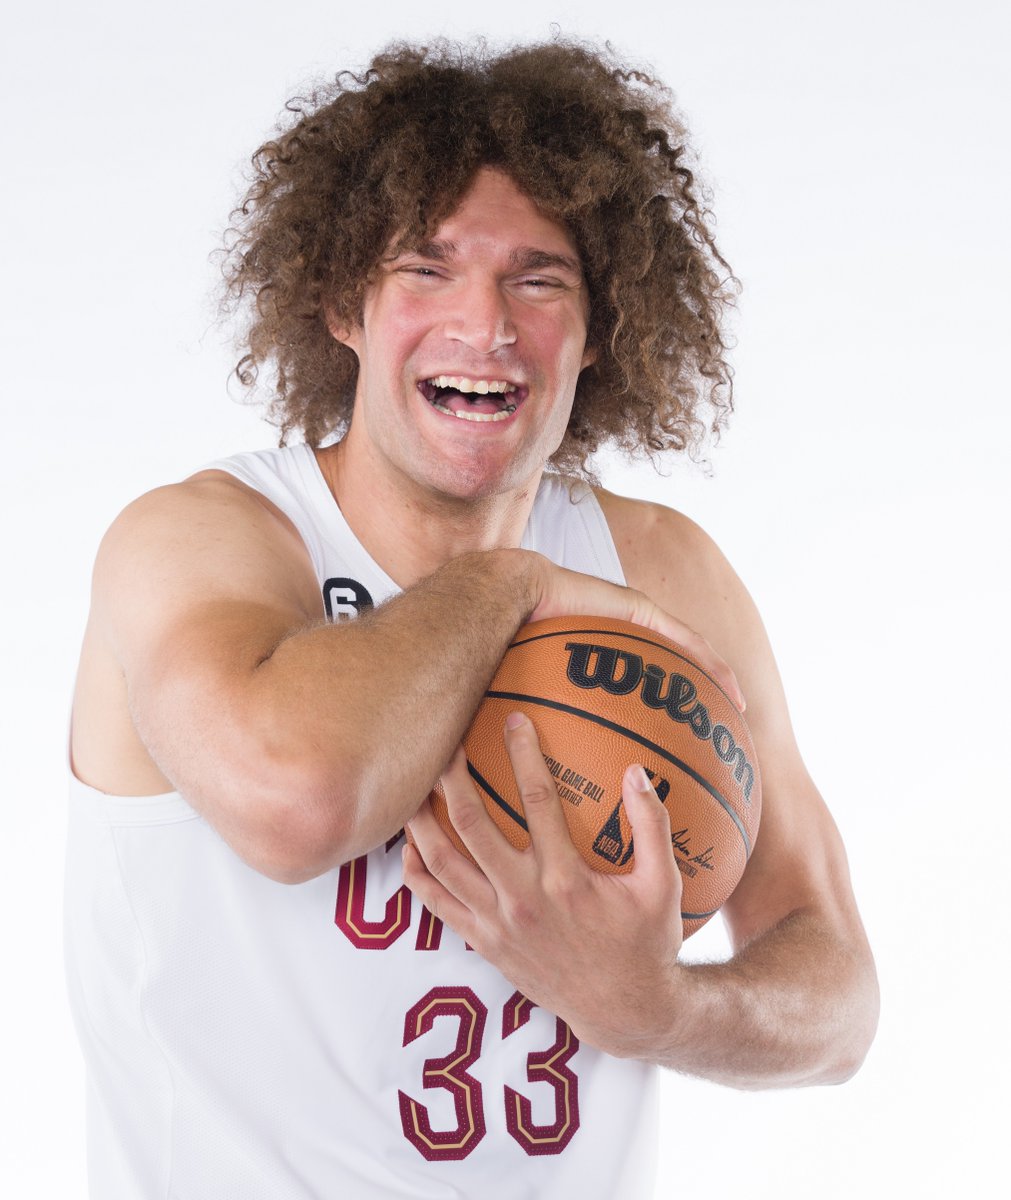 Join us in wishing @rolopez42 of the @cavs a HAPPY 35th BIRTHDAY! #NBABDAY